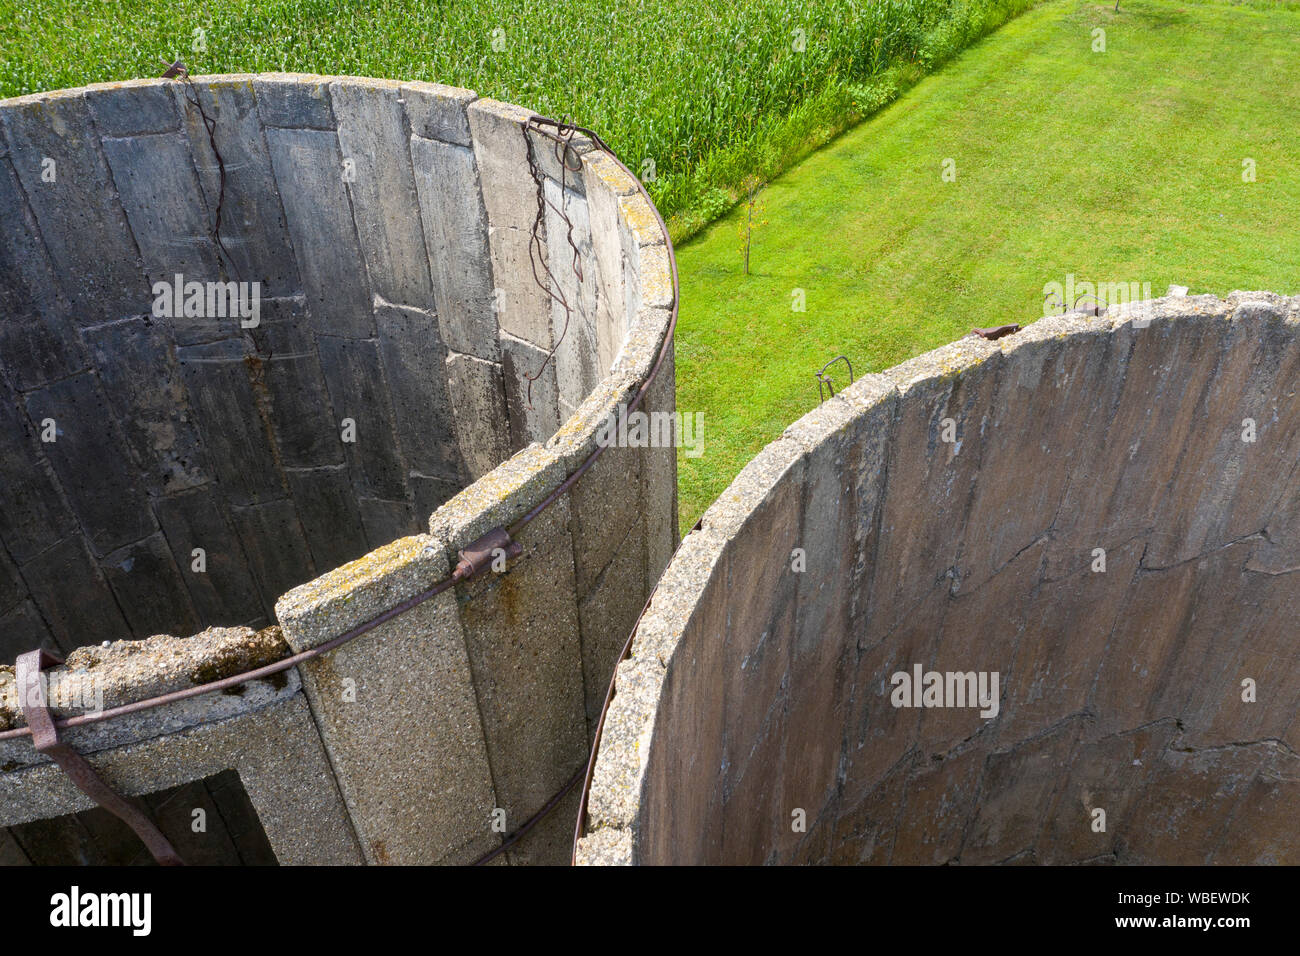 Three Oaks, Michigan - The remains of two old concrete silos on a Michigan farm. Stock Photo